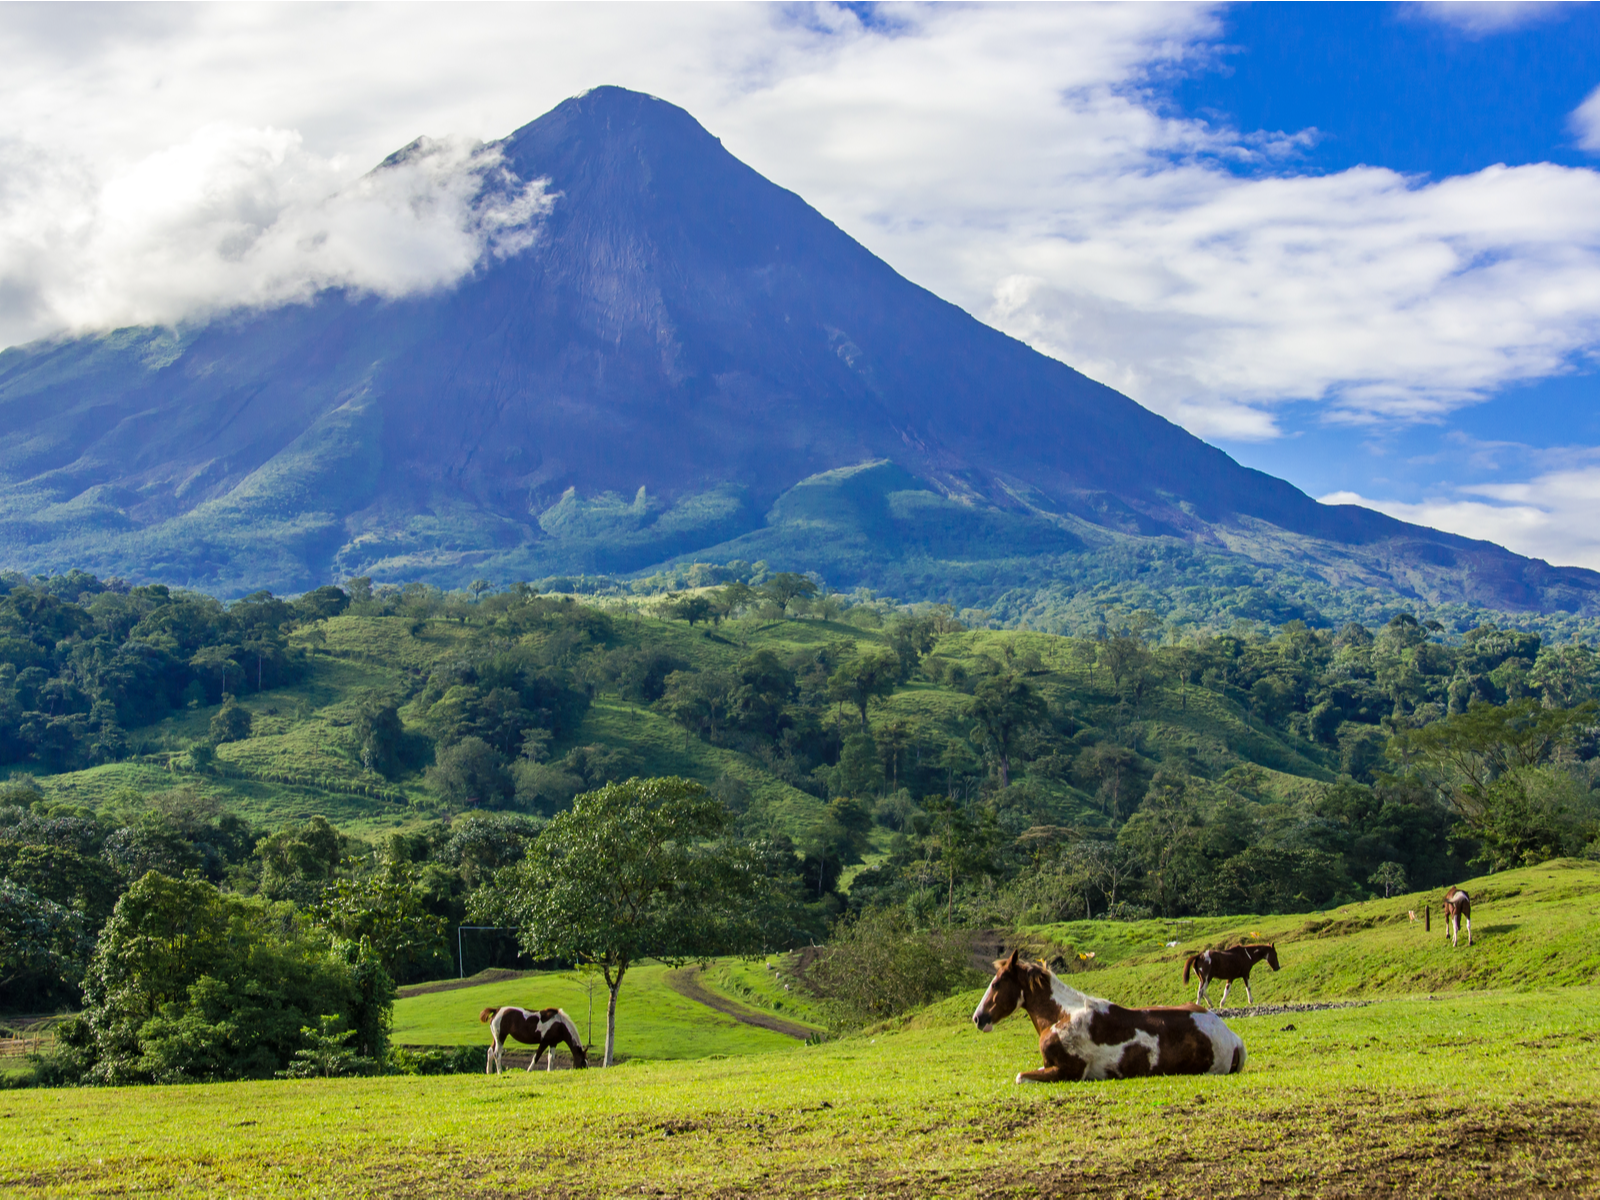 Four horses with white and brown pattern grazing at the foot of Arenal Volcano, pictured as a pice on best things to do in Costa Rica